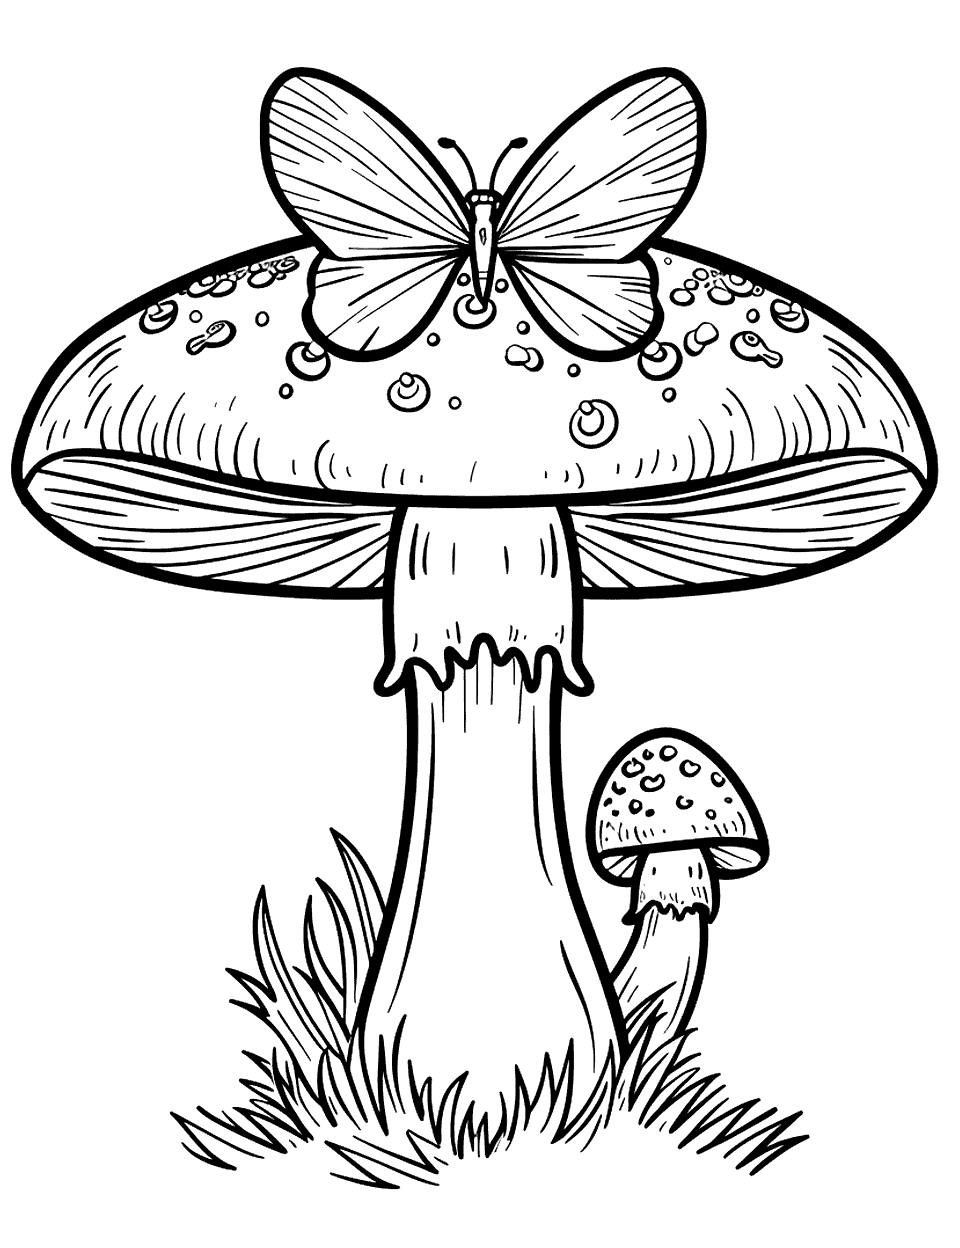 Simple Butterfly on Mushroom Coloring Page - A simple scene of a butterfly resting on a mushroom cap.